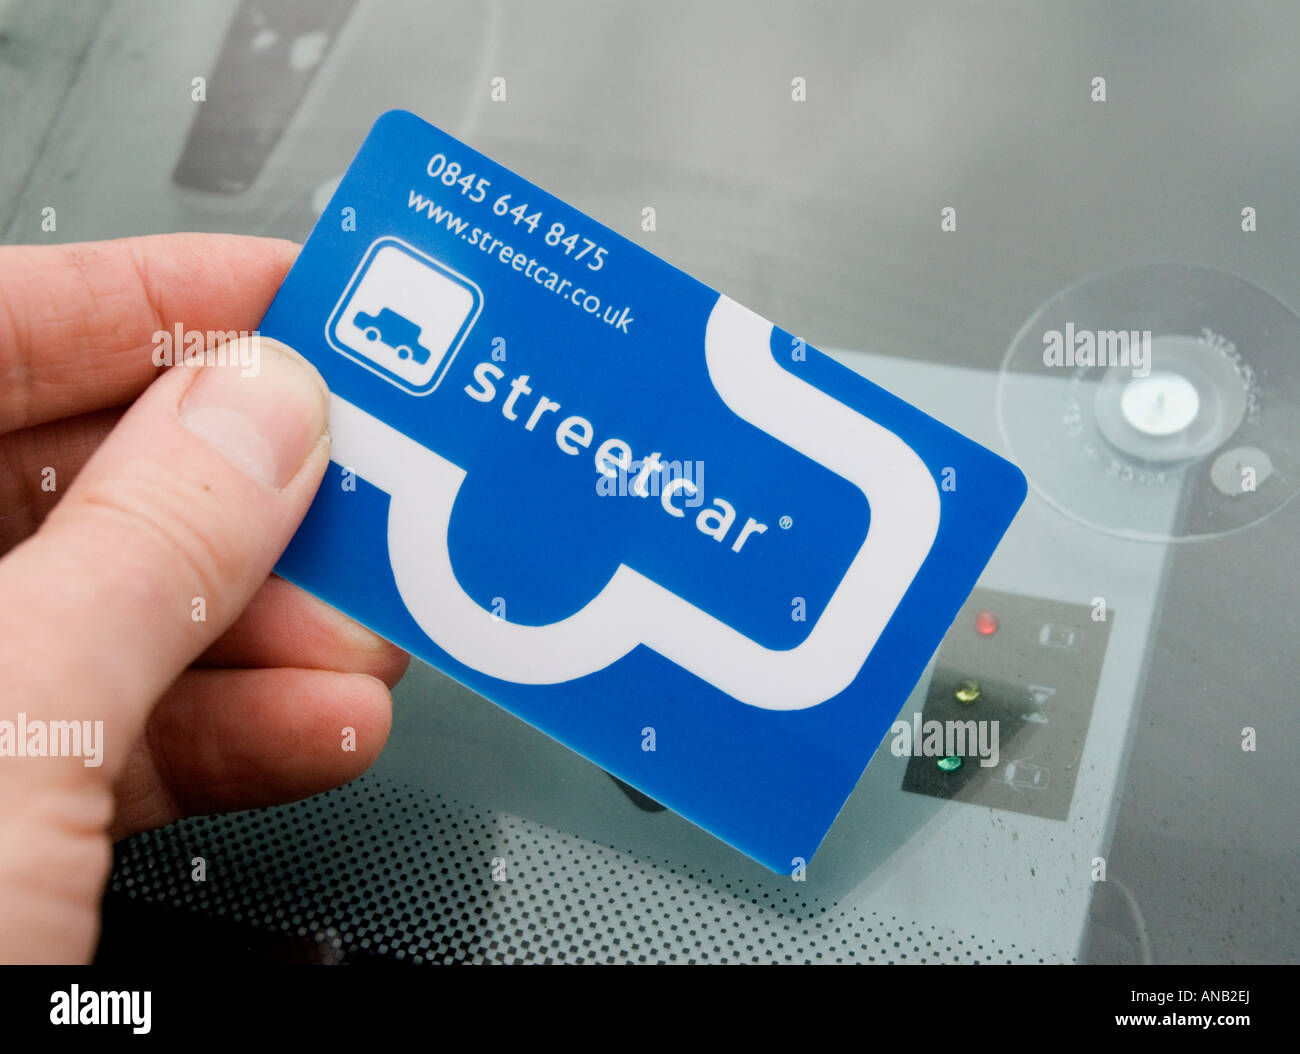 Smart card being used against card reader inside windscreen of Streetcar car sharing company Stock Photo